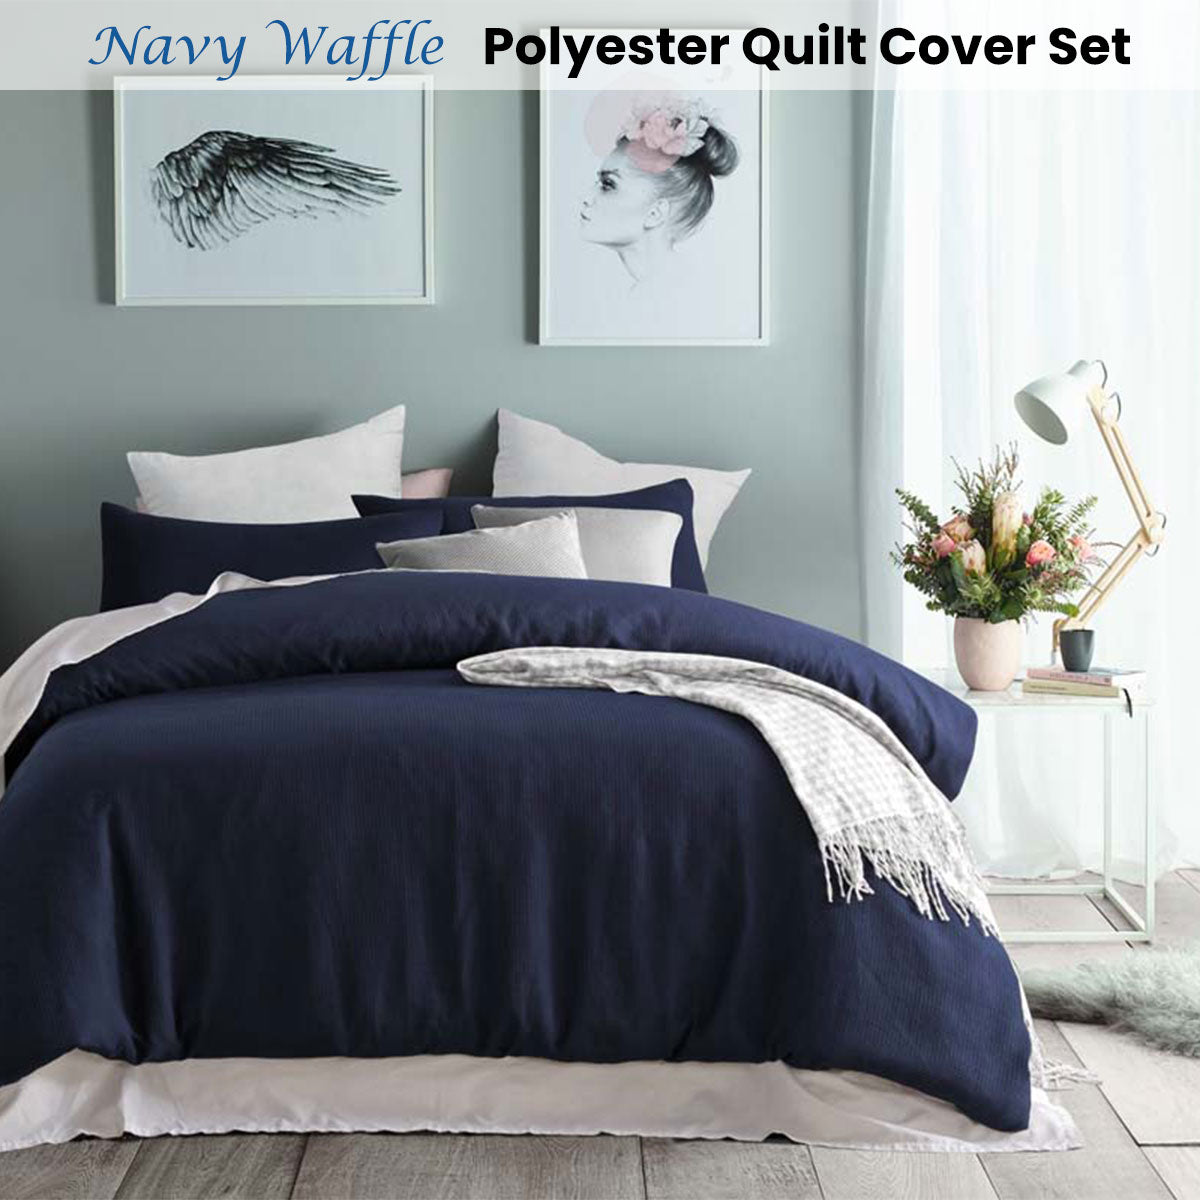 NAVY WAFFLE QUILT COVER SET - KING